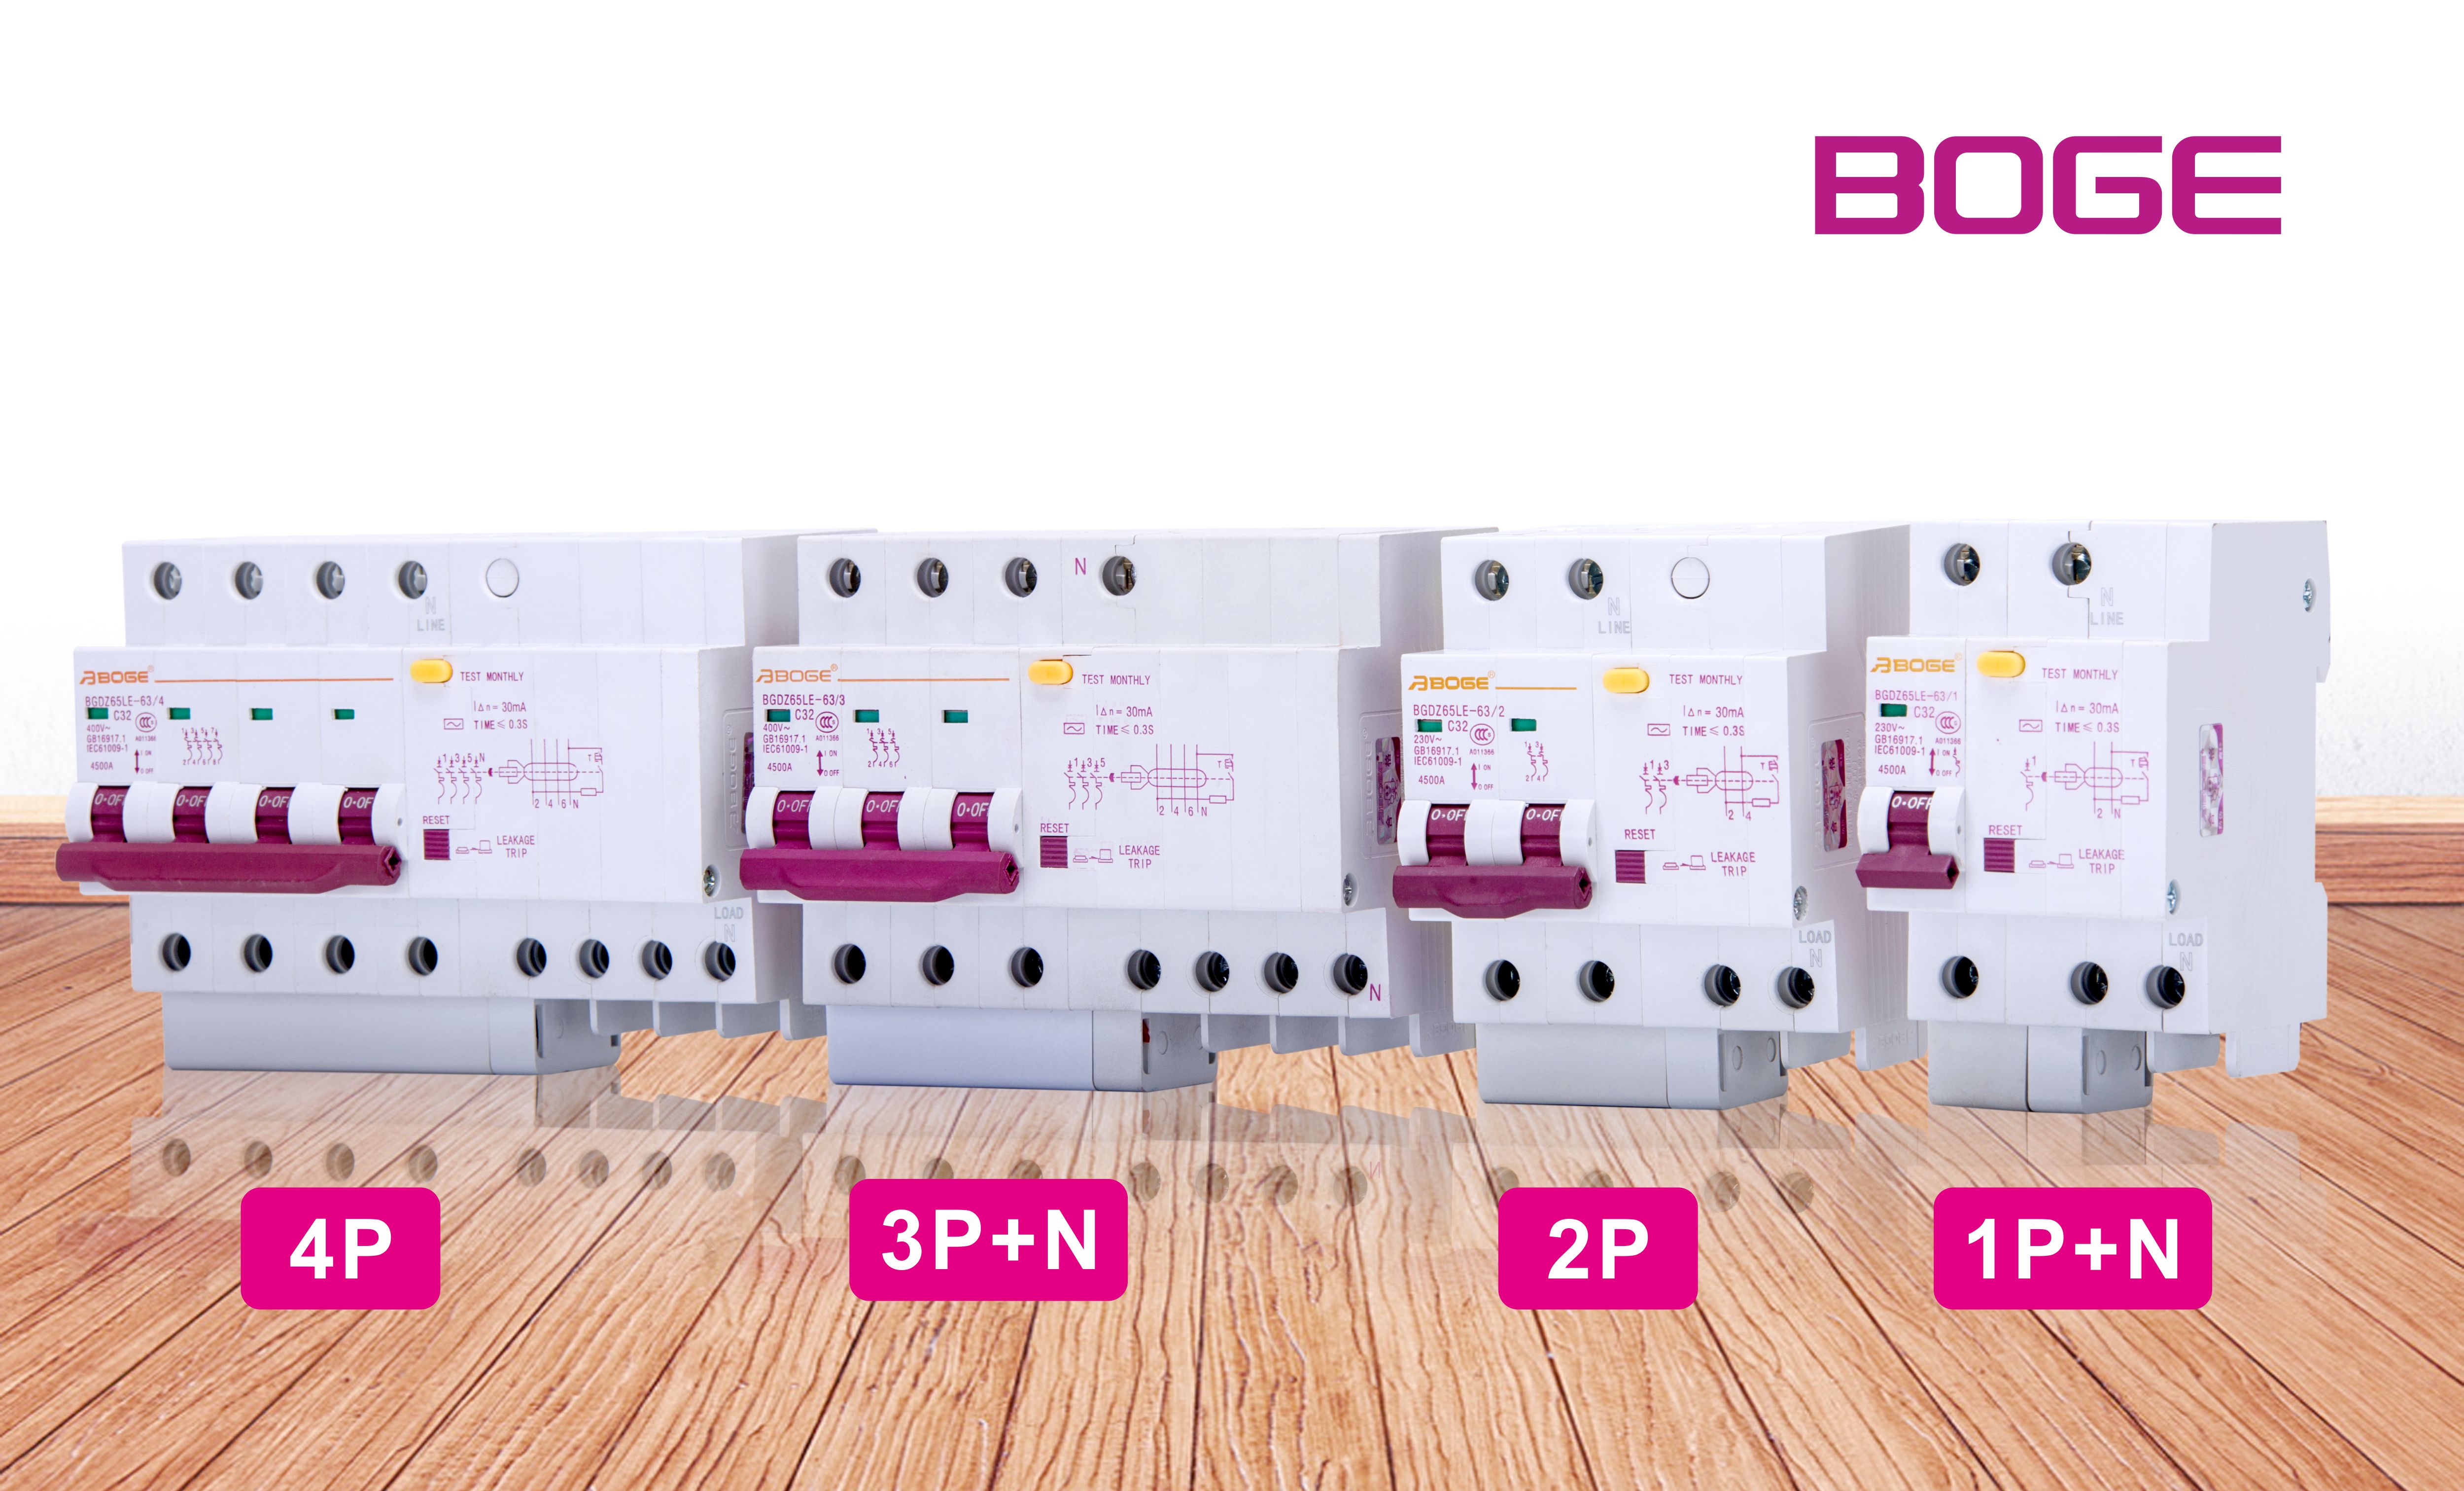 1 P+N RCCB (Residual Current Breaker With Overload Protection)